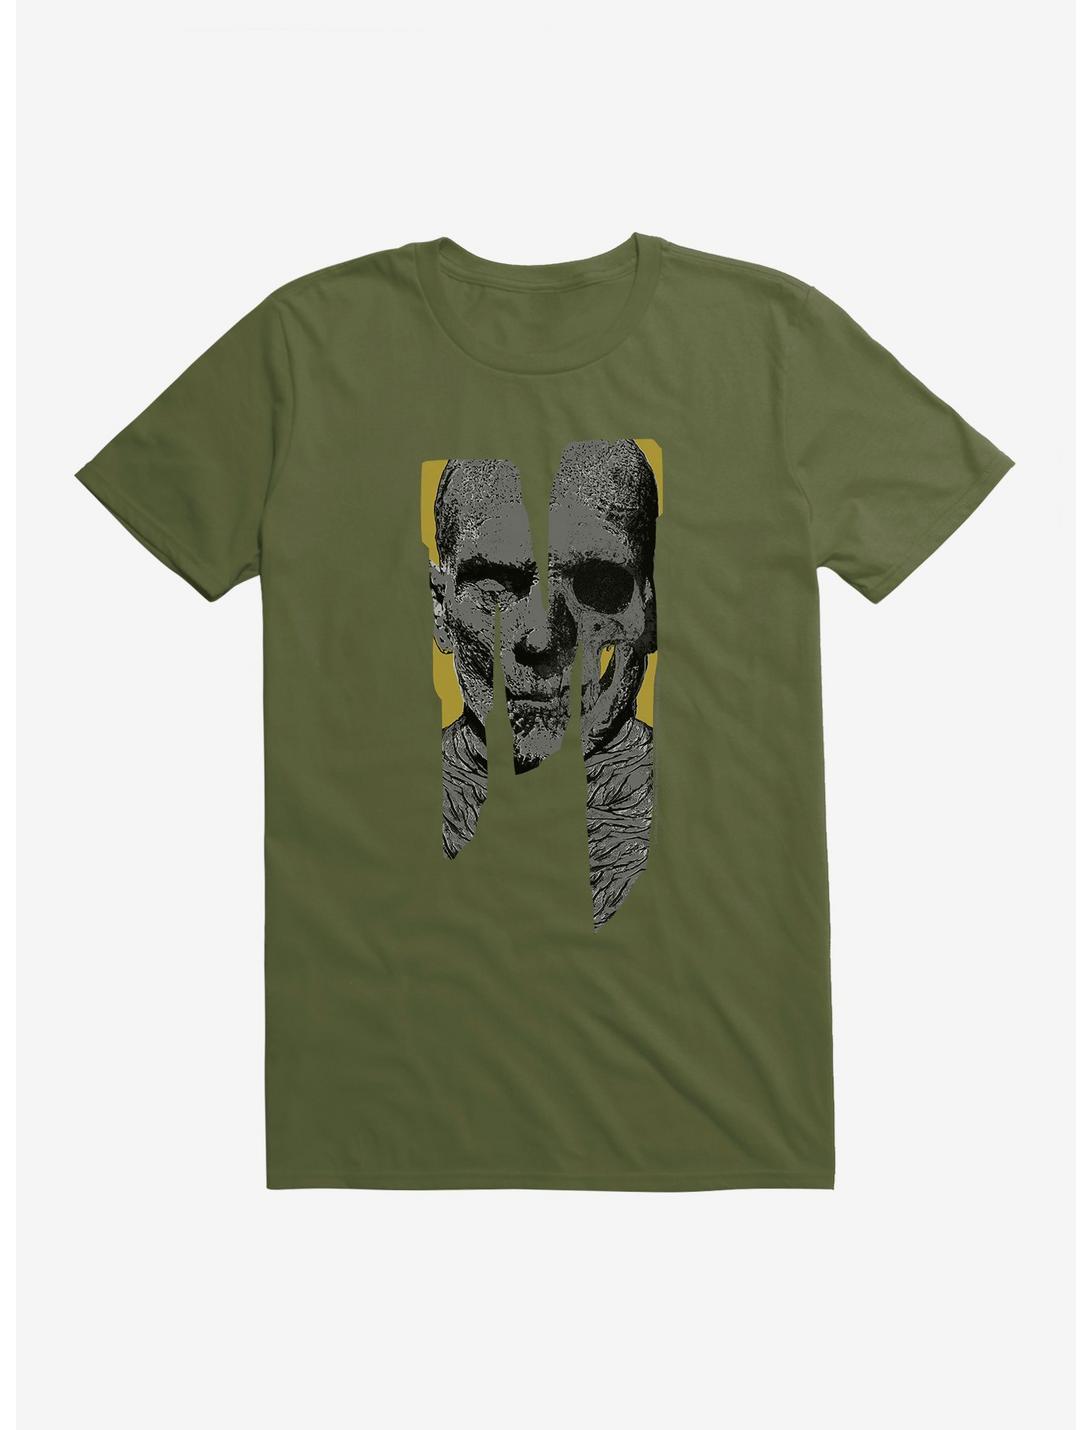 Universal Monsters The Mummy Letter Face T-Shirt, , hi-res